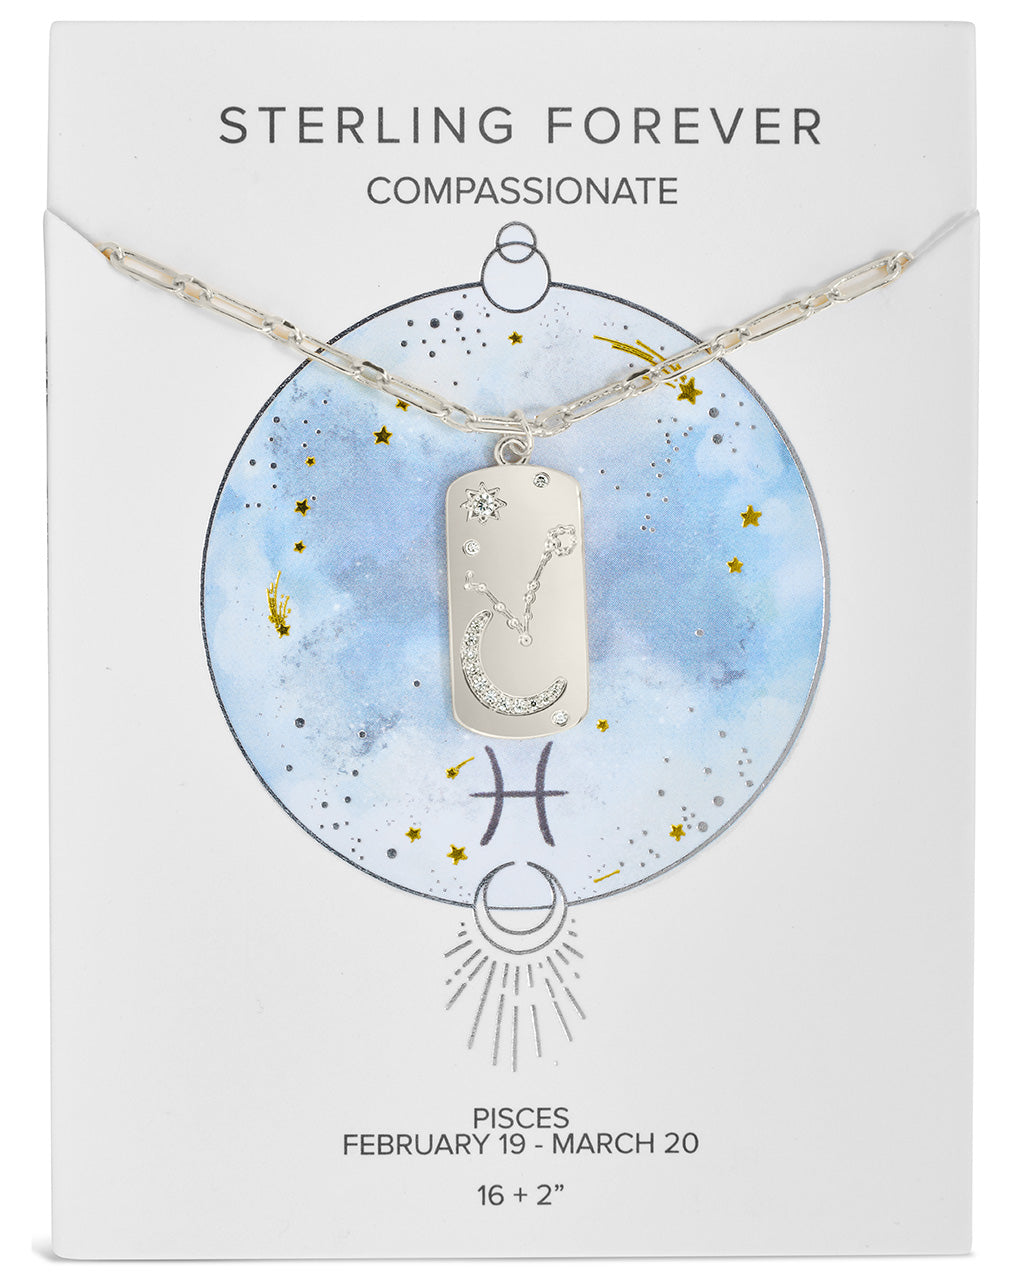 Constellation Dog Tag Necklace Necklace Sterling Forever Silver Pisces (Feb 19 - Mar 20) 